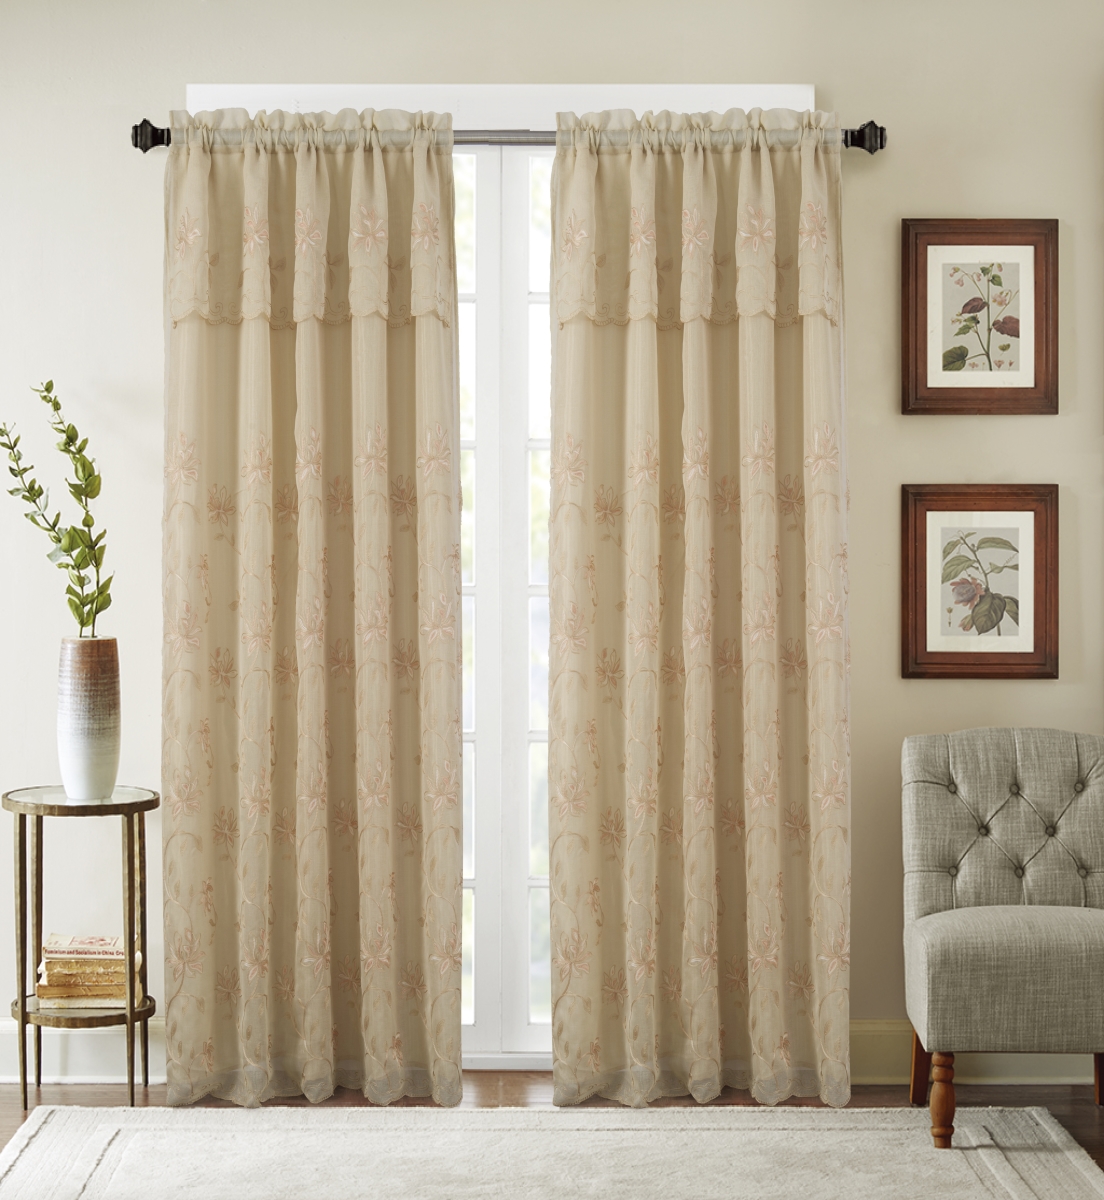 Pnd23631 54 X 84 In. Durant Floral Embroidered Single Rod Pocket Curtain Panel With Attached Valance, Gold